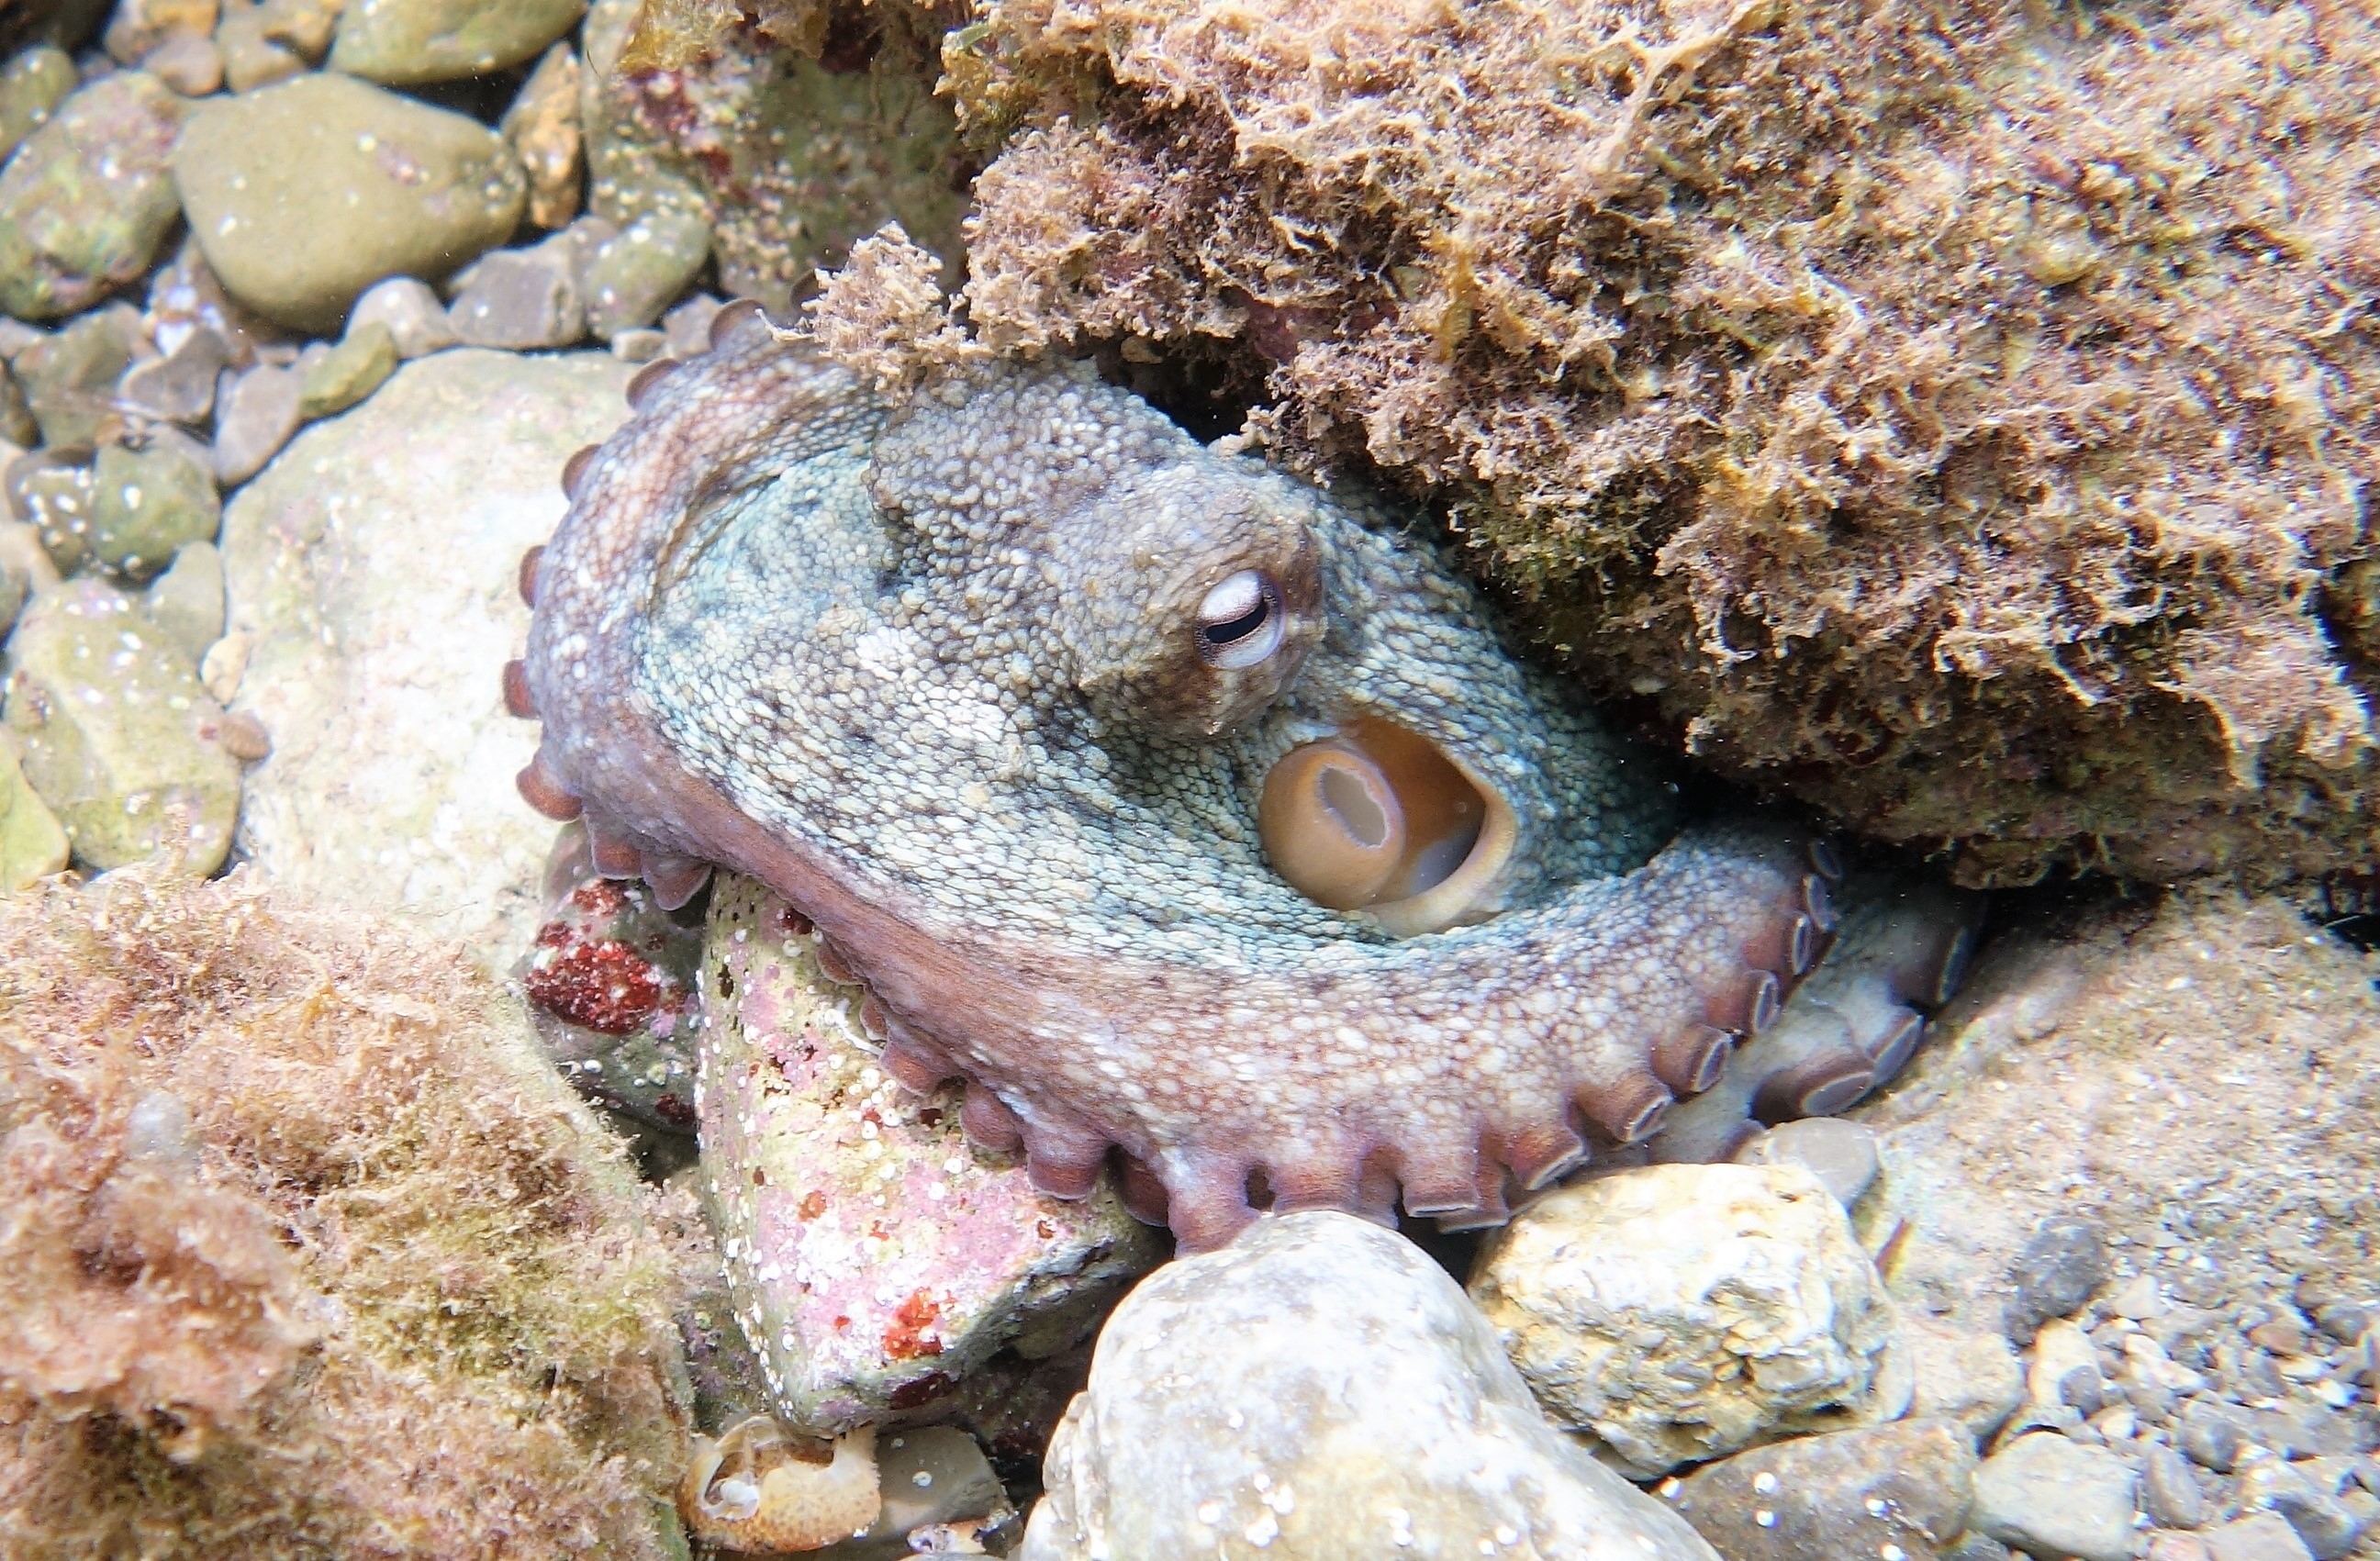 The octopus is a predatory animal, feeding upon molluscs, crustaceans and other marine creatures. It typically lives in a shelter by rocks, from which it can mount hunting trips.